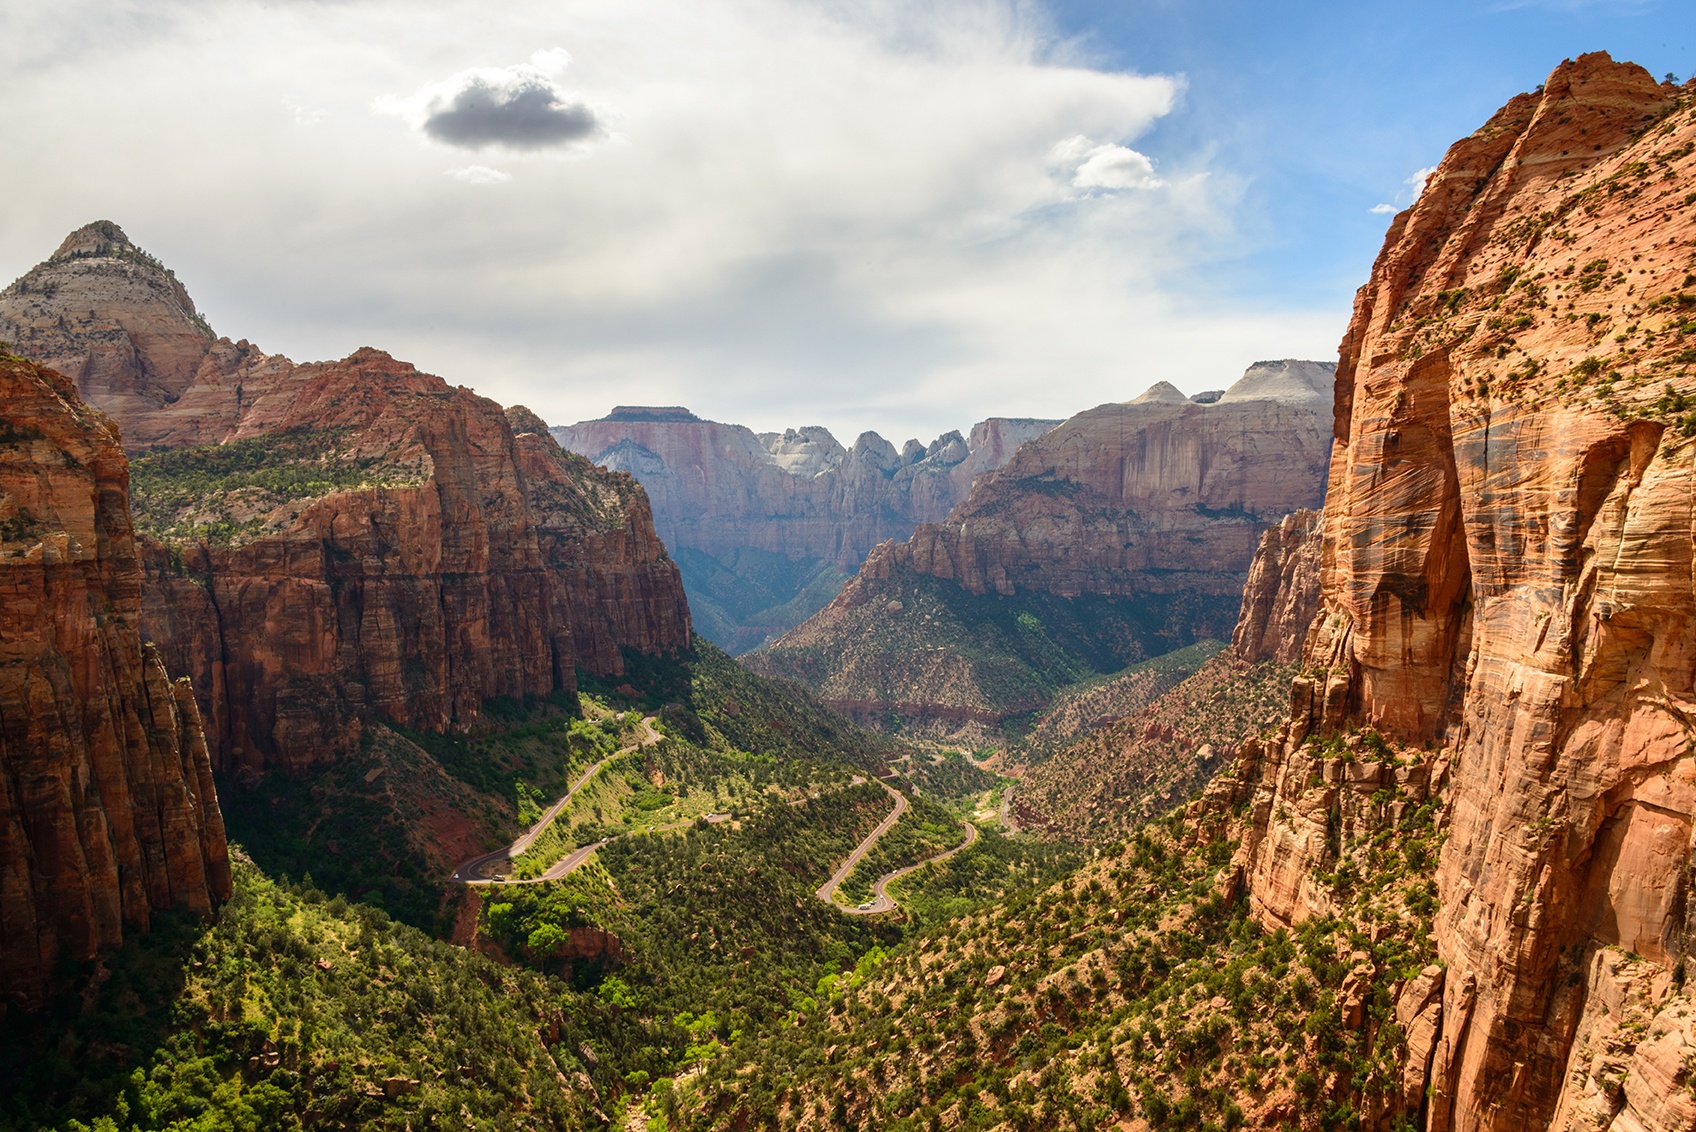 Zion National Park, Utah is perfect for campers of all skill levels